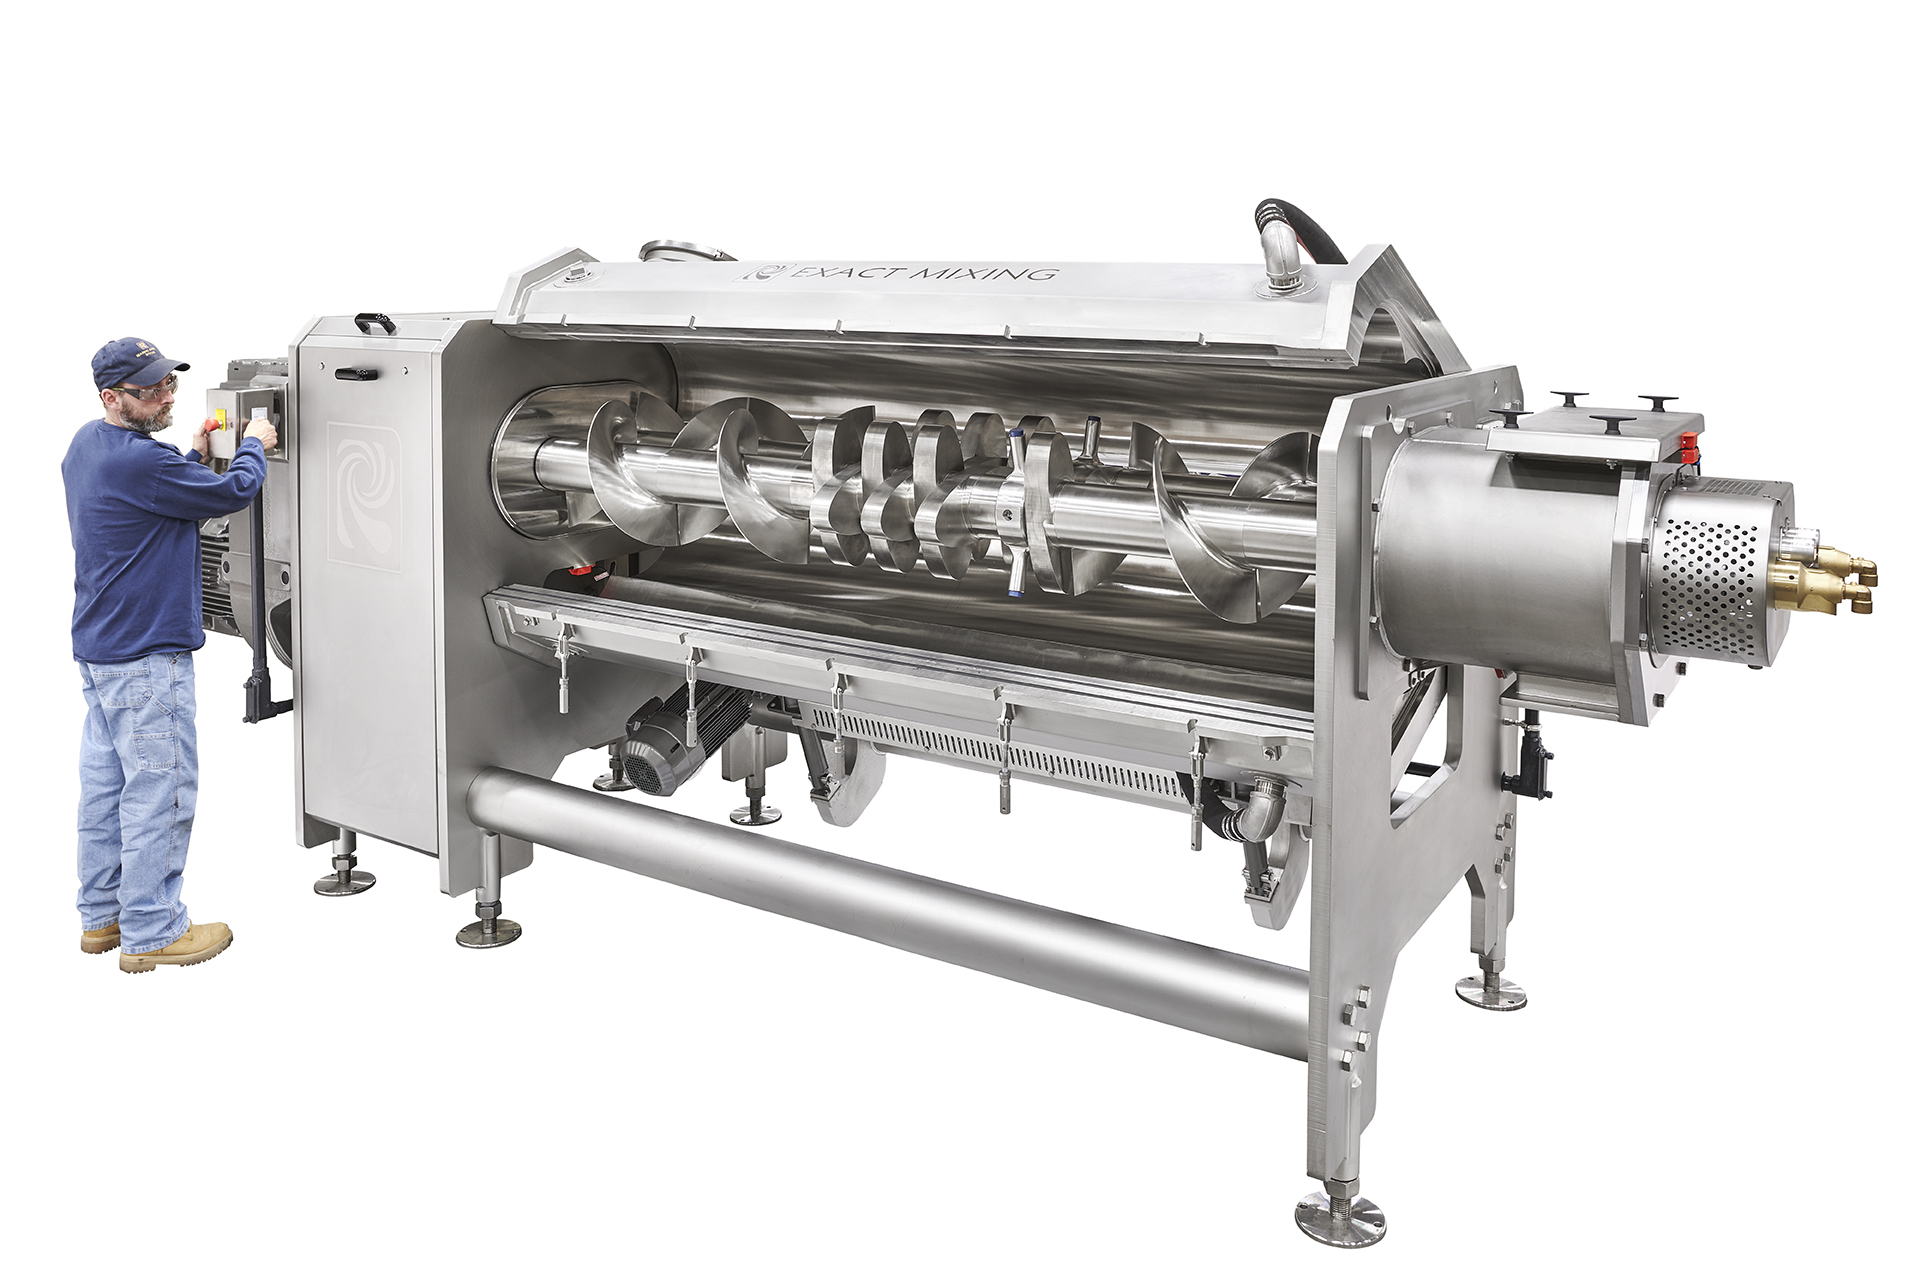 Pictured in the image is the MX Continuous Mixer, capable of producing dough at up to 6500 kg/hr.